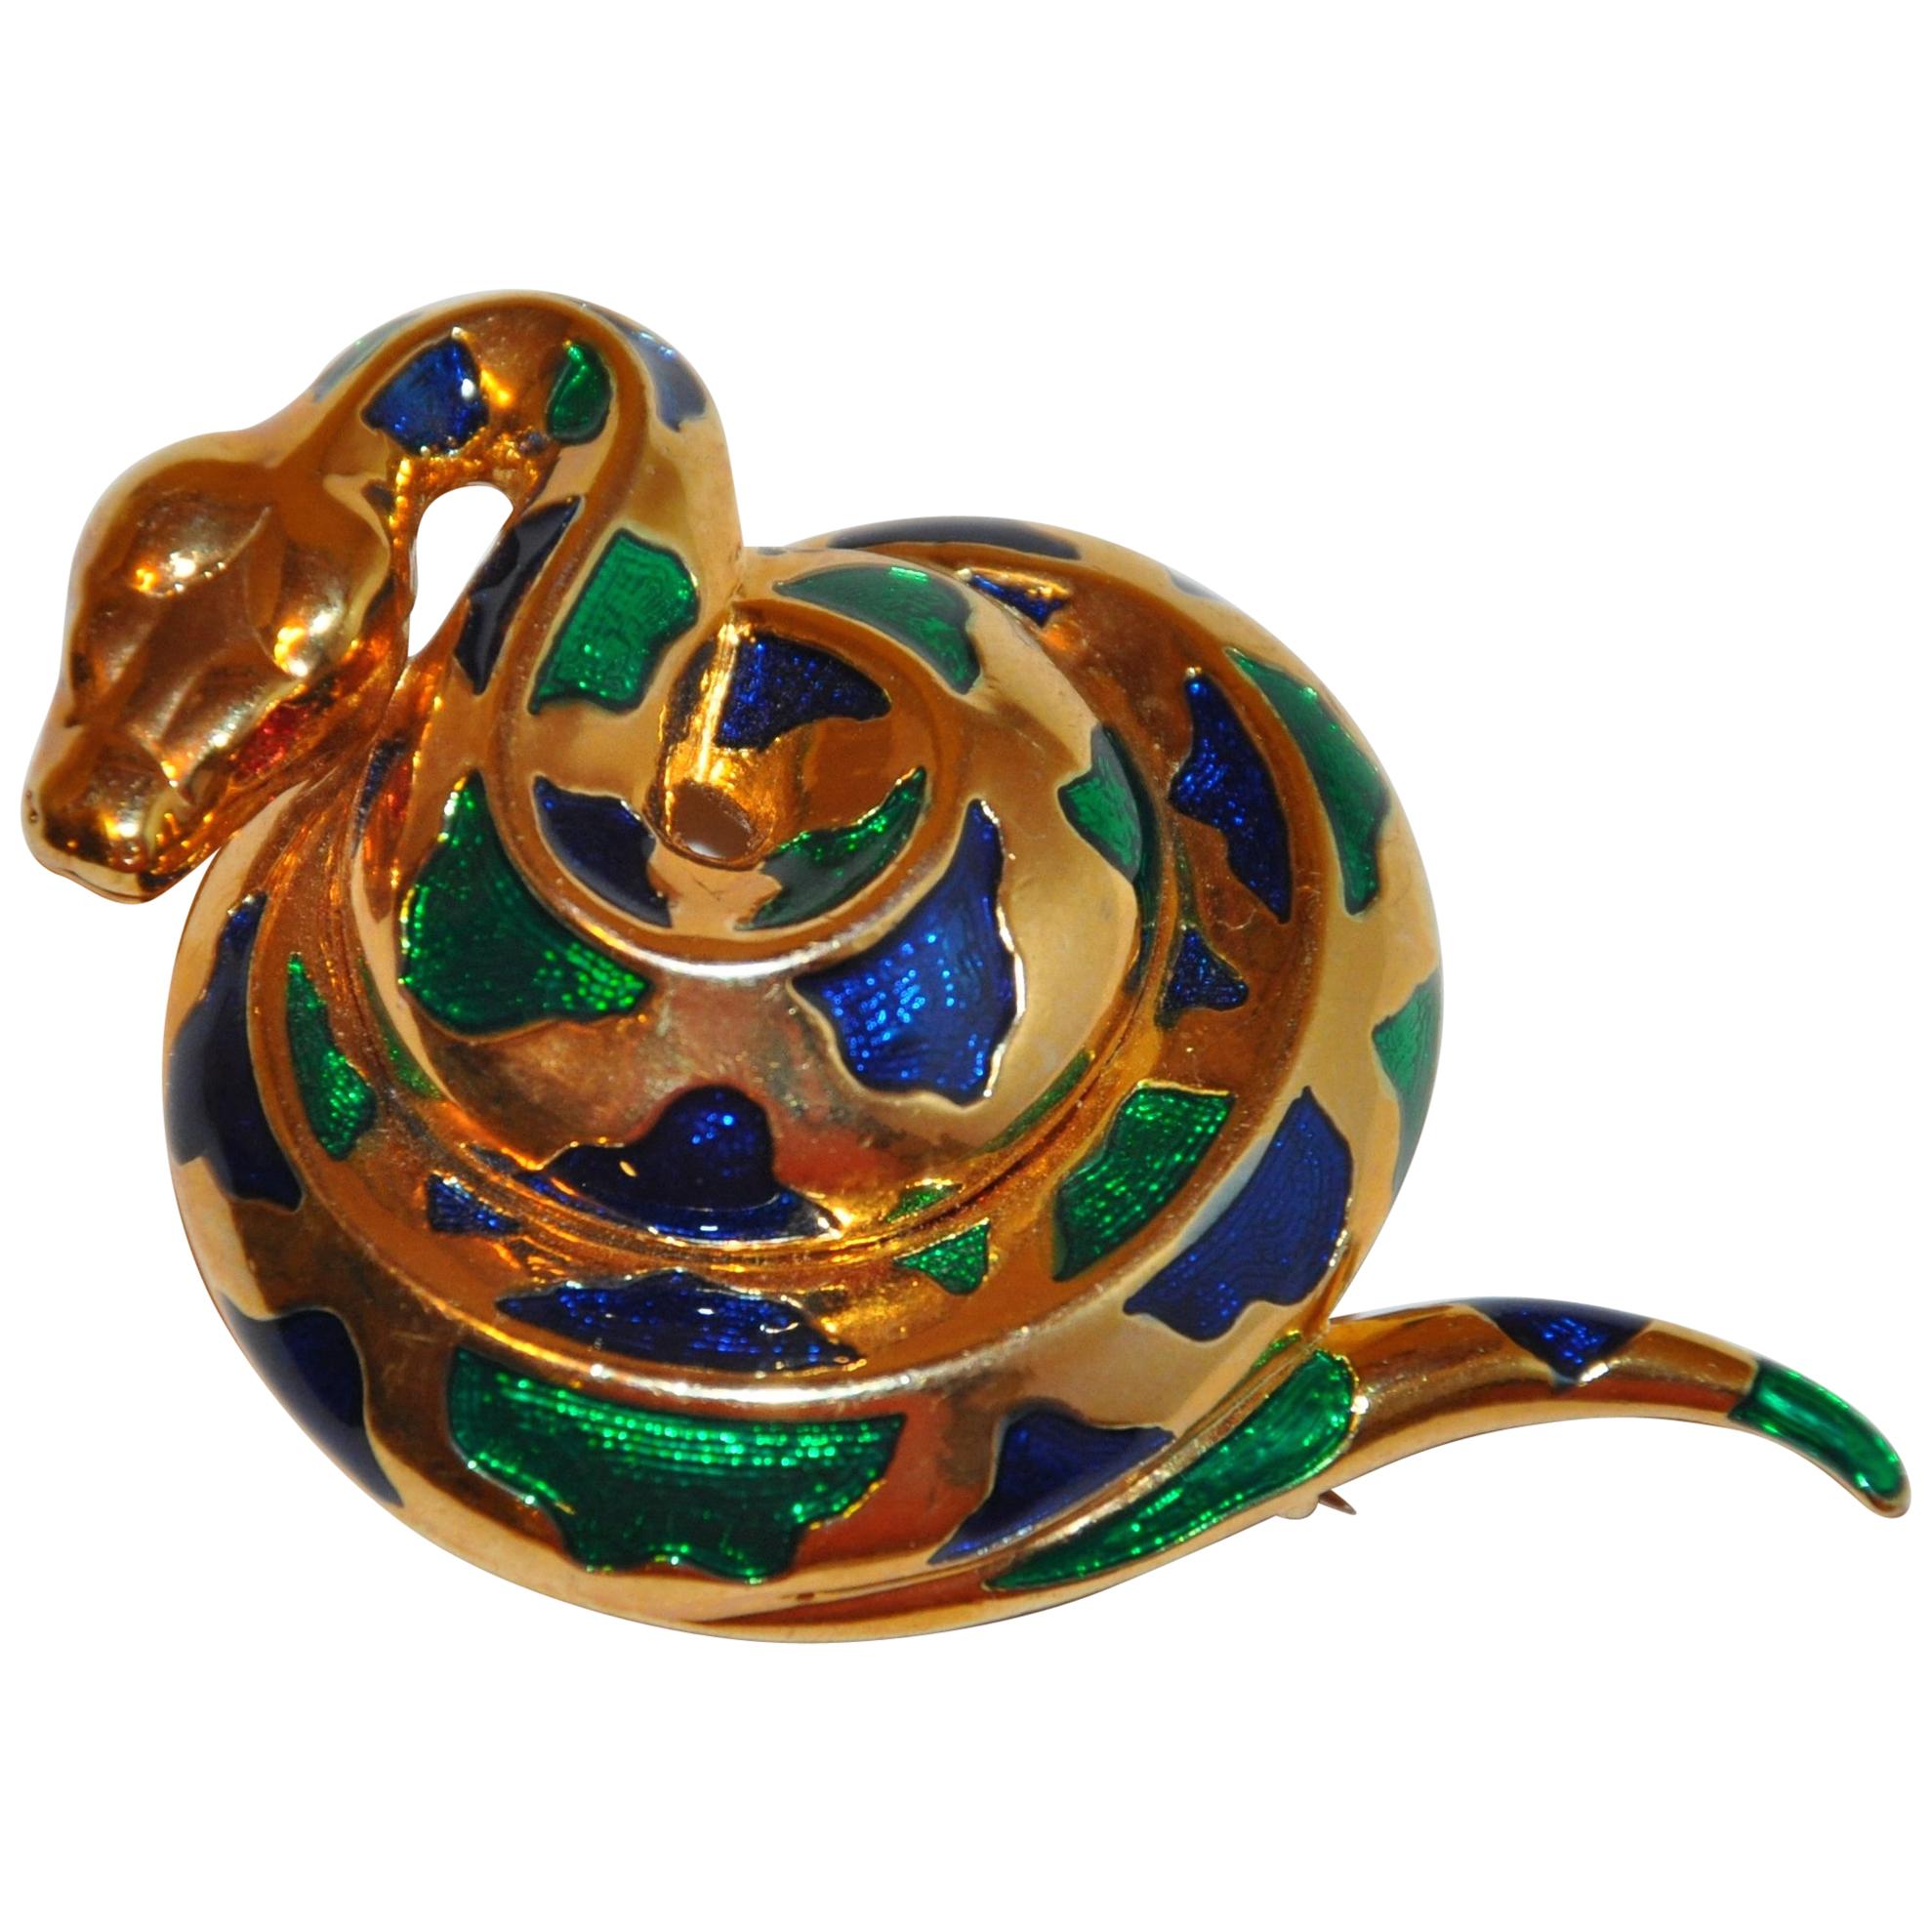 Whimsical Gilded Gold Hardware with MultiColor Enamel Inlay "Copperhead" Brooch